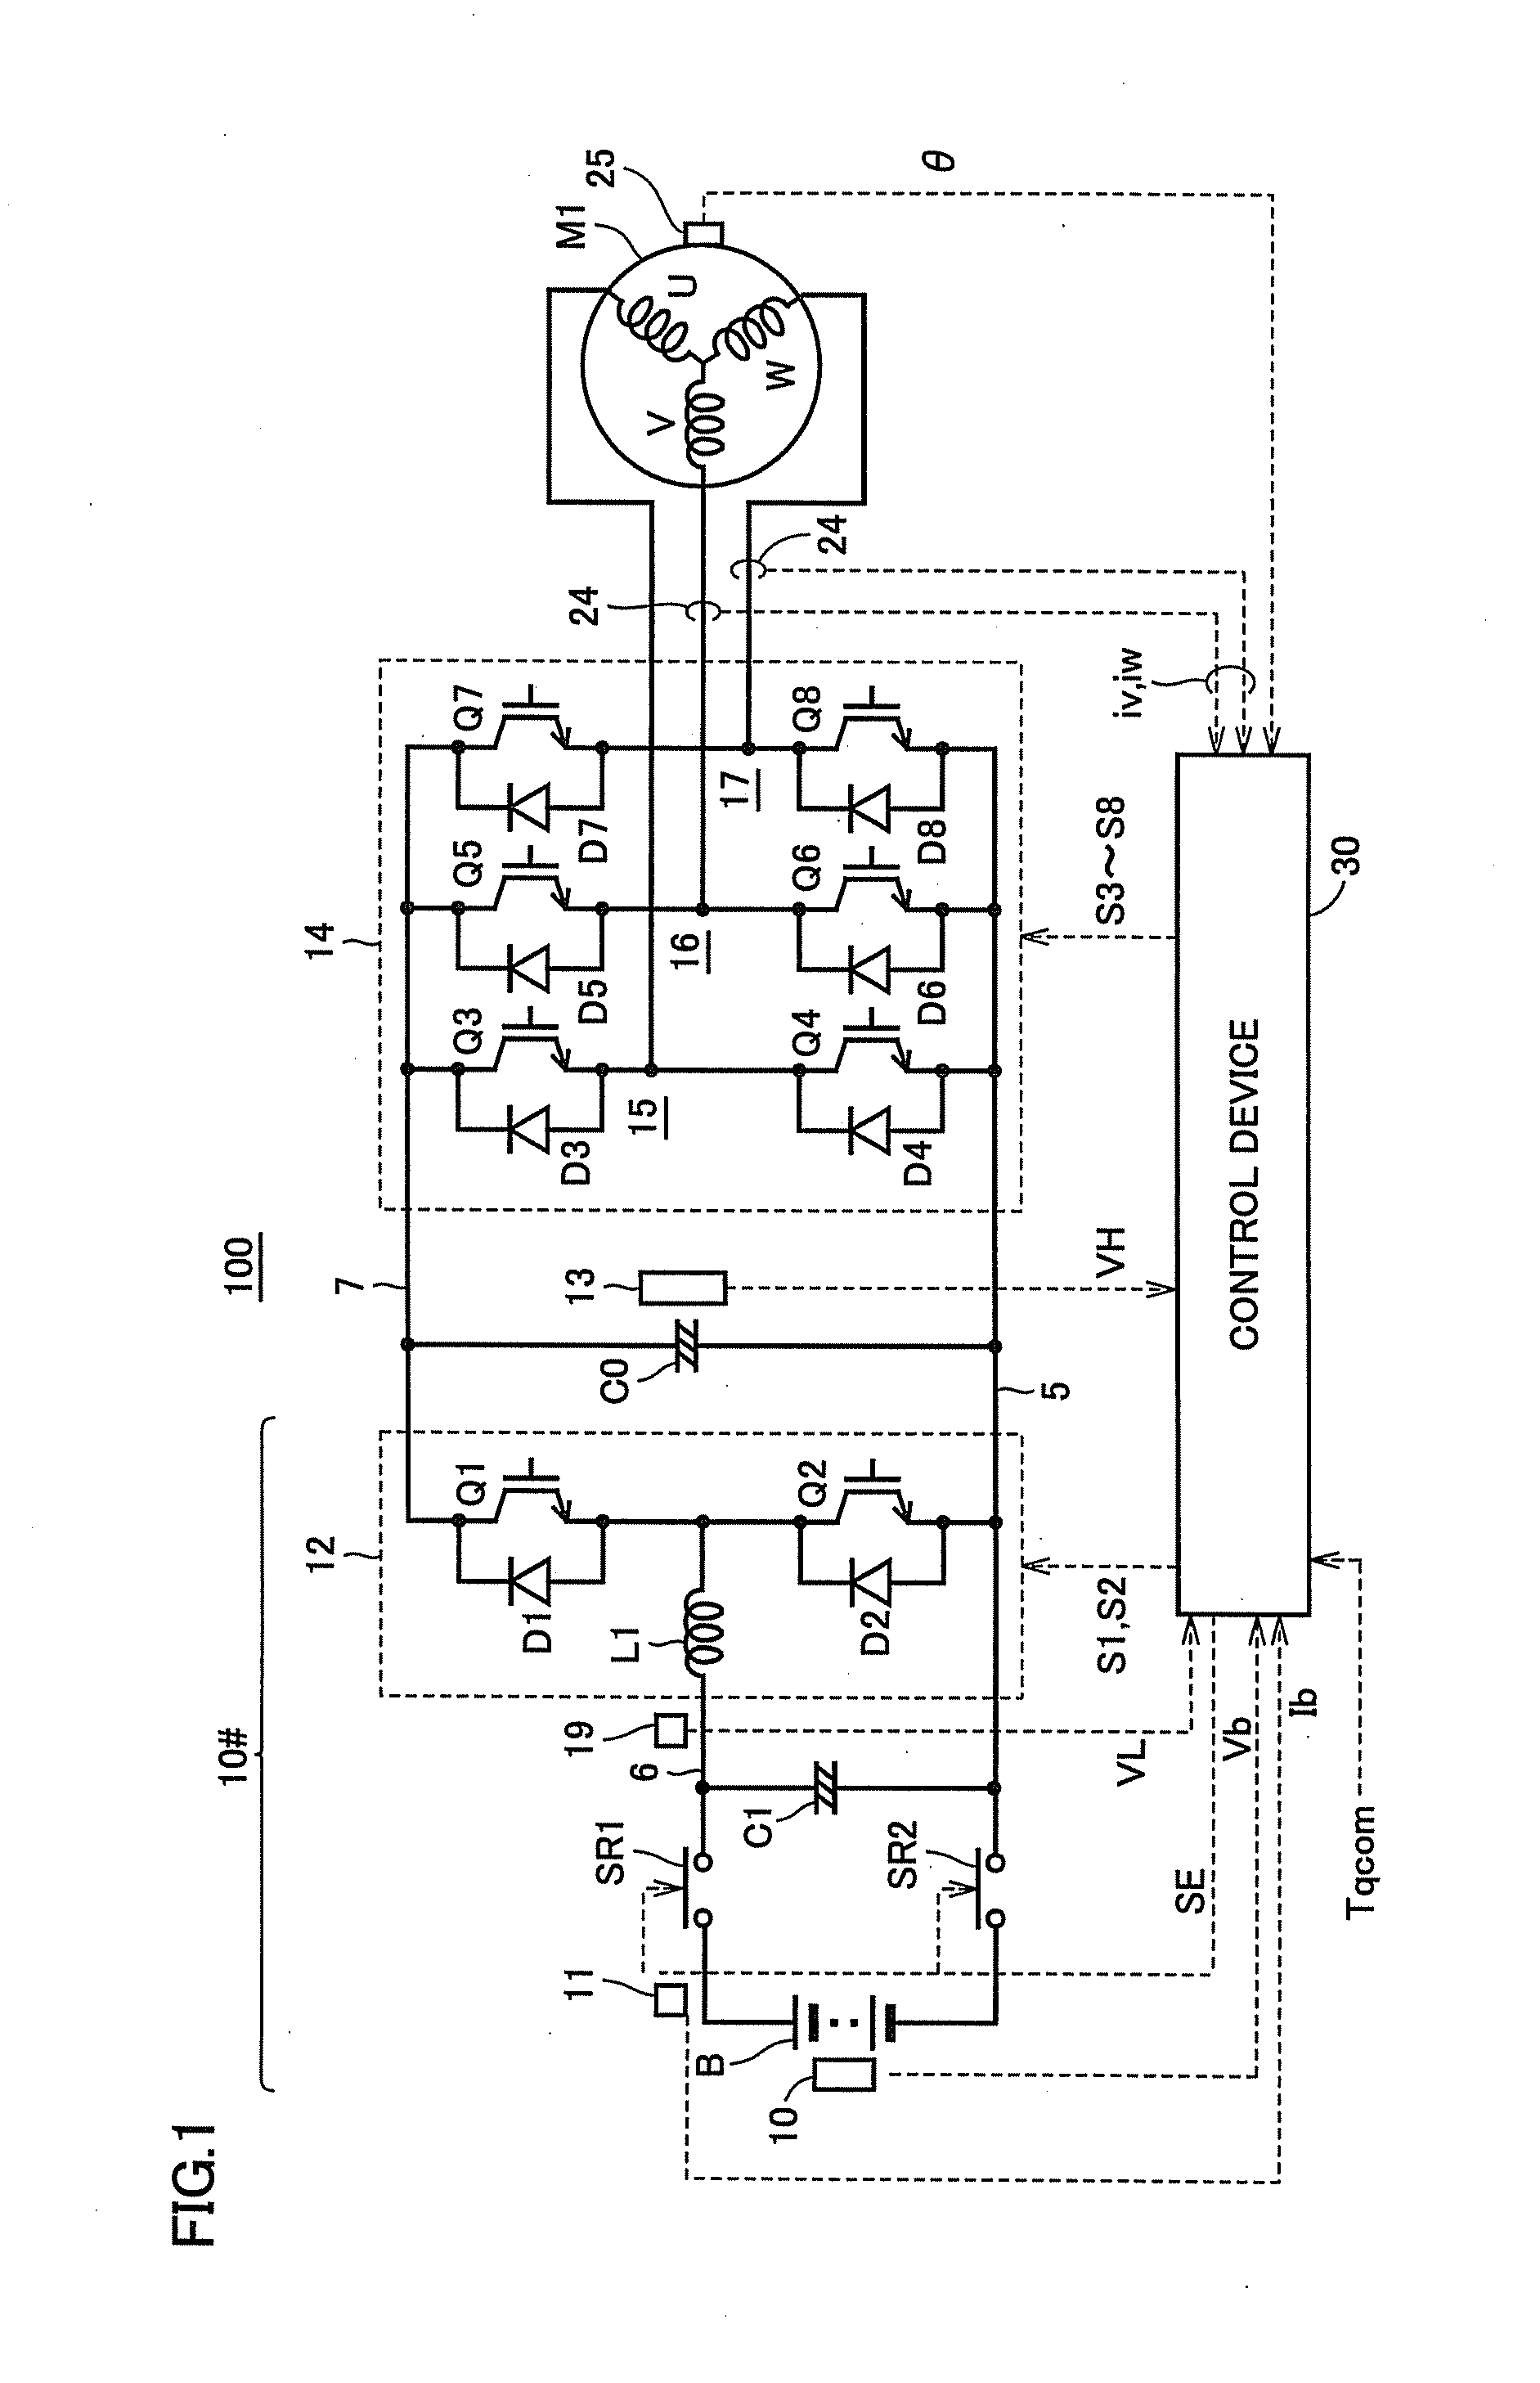 Control system for ac electric motor